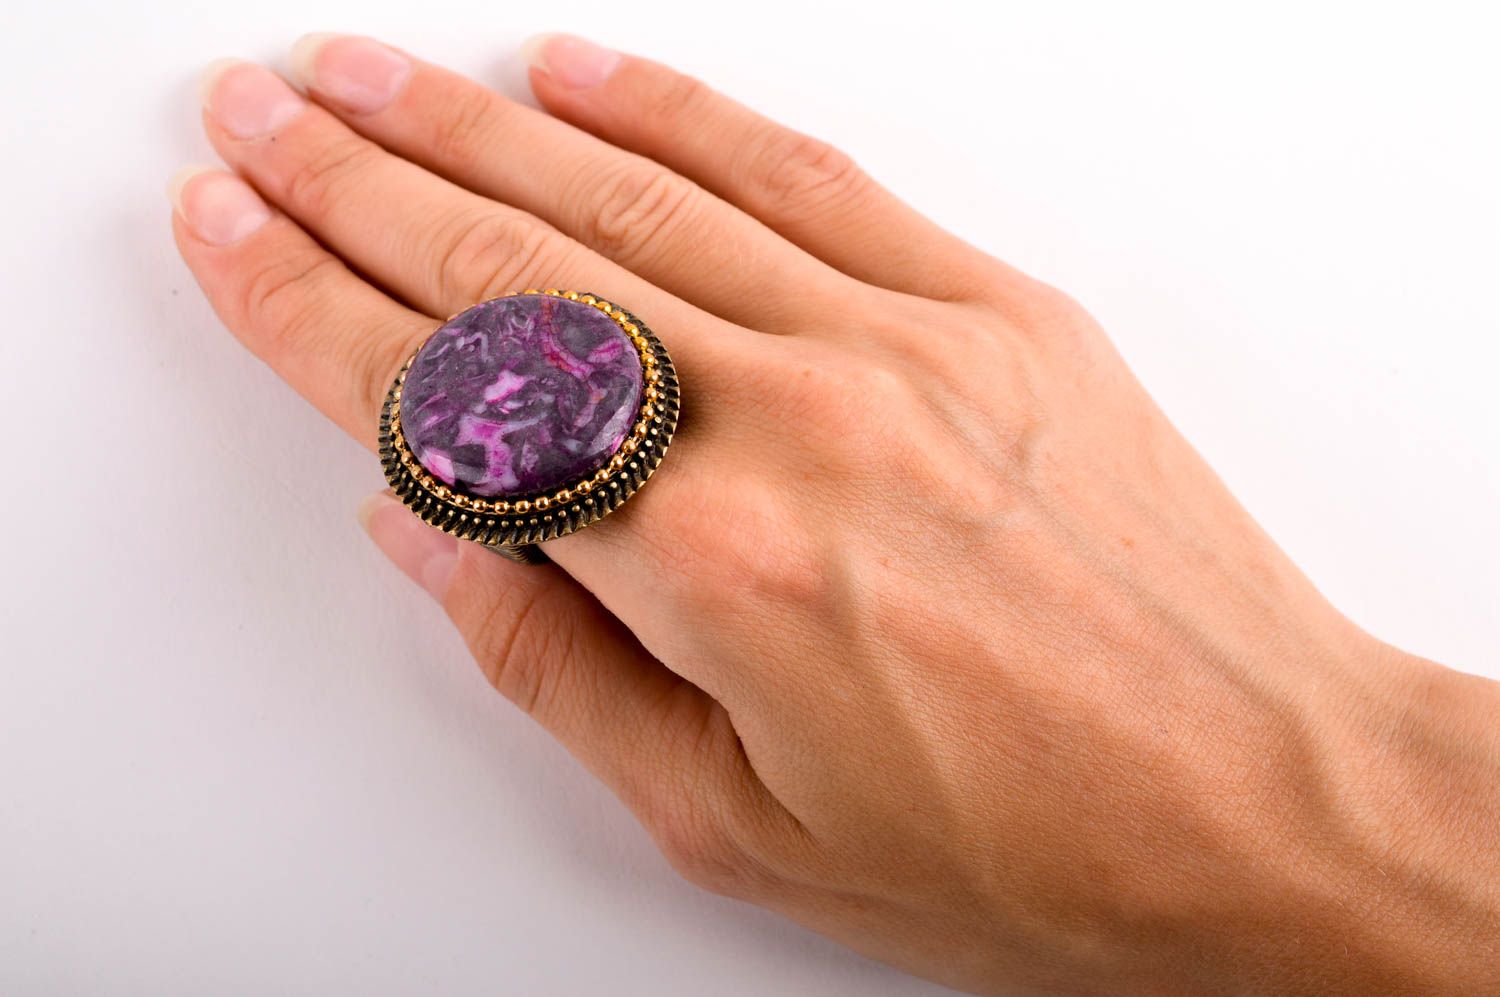 Handmade ring designer ring with stone unusual accessory for women gift ideas photo 5